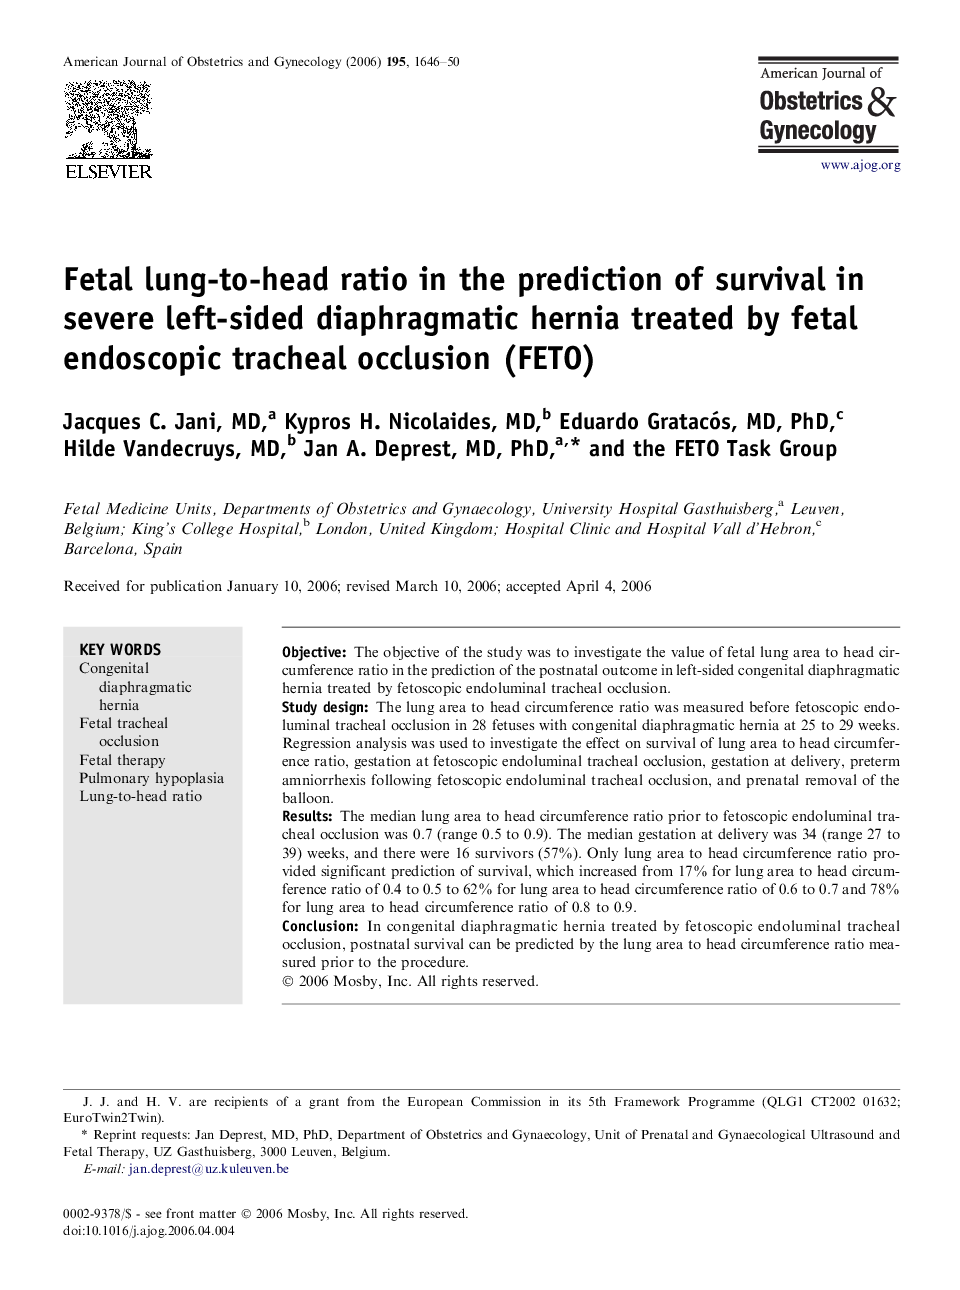 Fetal lung-to-head ratio in the prediction of survival in severe left-sided diaphragmatic hernia treated by fetal endoscopic tracheal occlusion (FETO) 